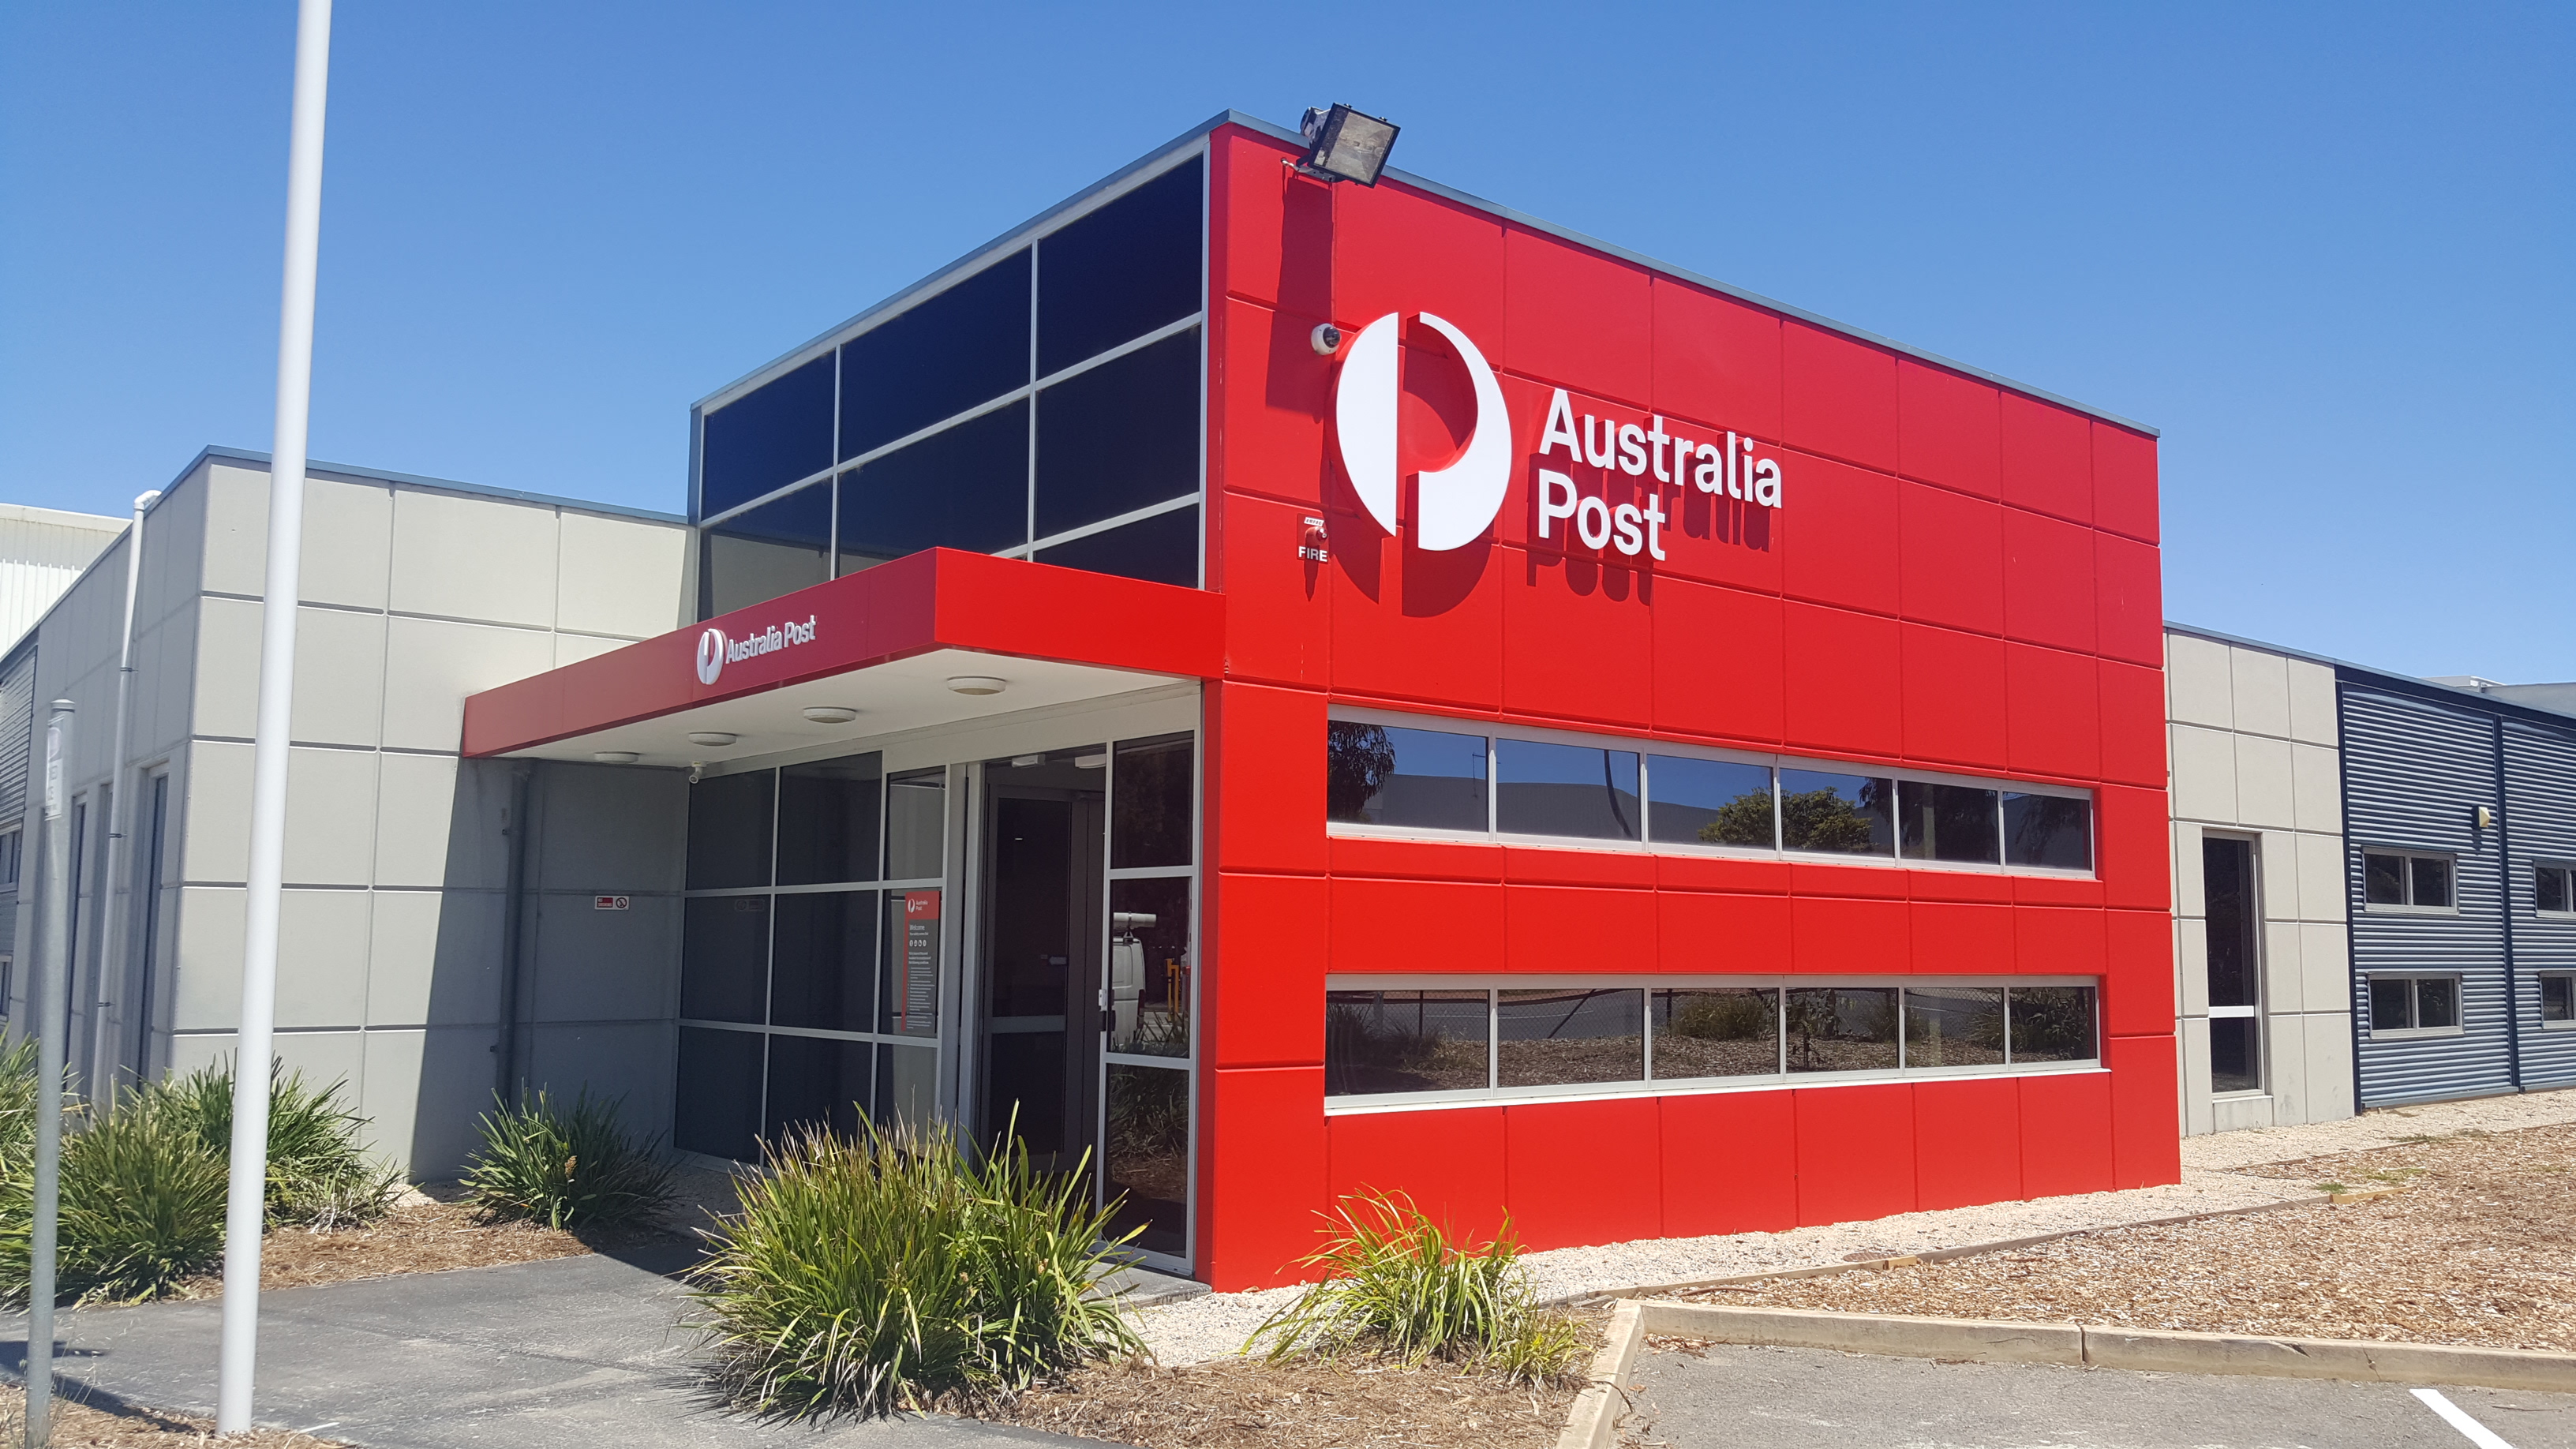 Featured image for “Australia Post”